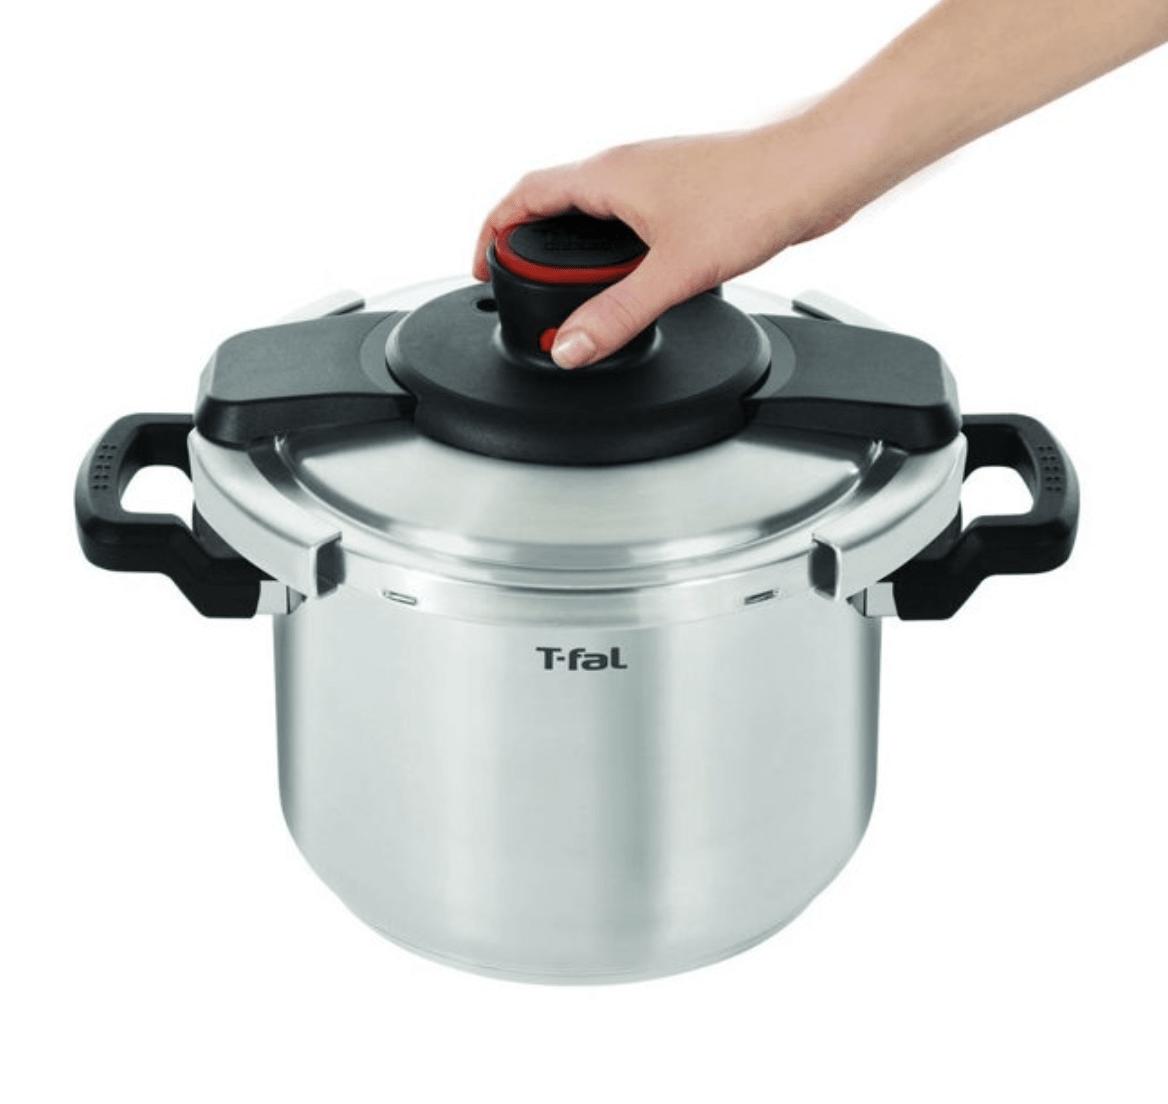 The Best Pressure Cookers